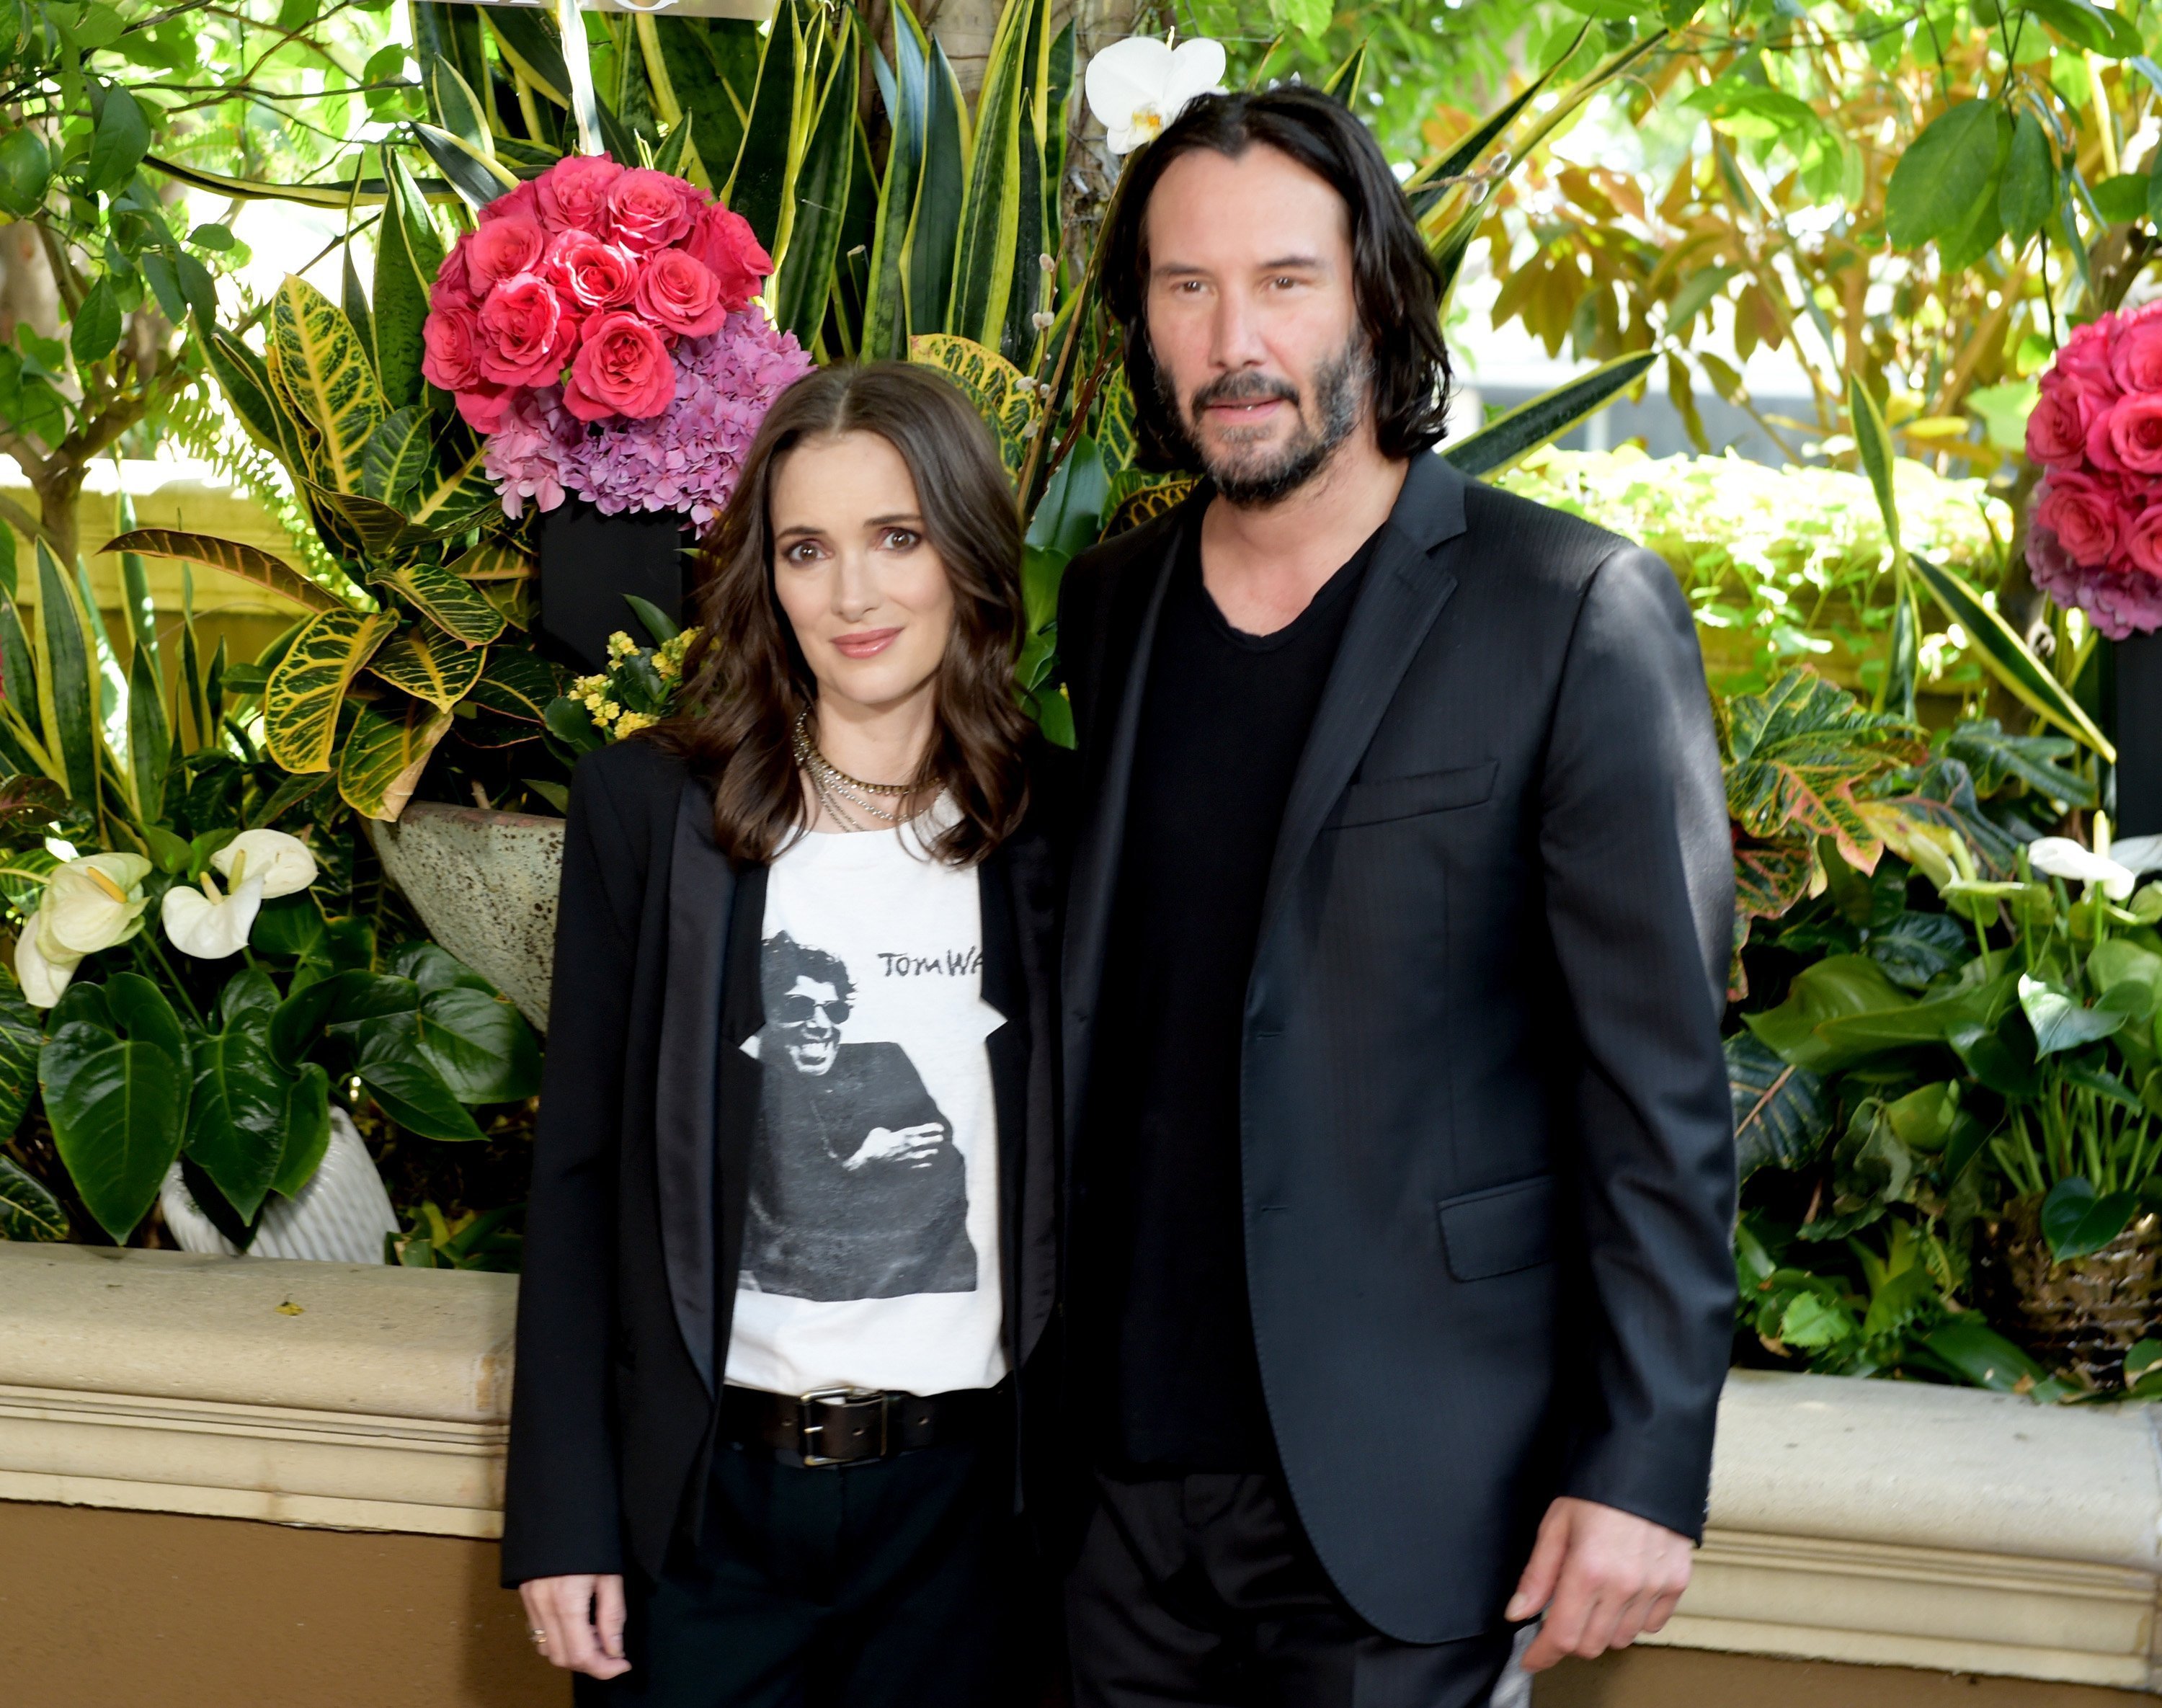 Winona Ryder and Keanu Reeves attend a photo call for Regatta's "Destination Wedding" at the Four Seasons Hotel Los Angeles at Beverly Hills on August 18, 2018, in Los Angeles, California. | Source: Getty Images.